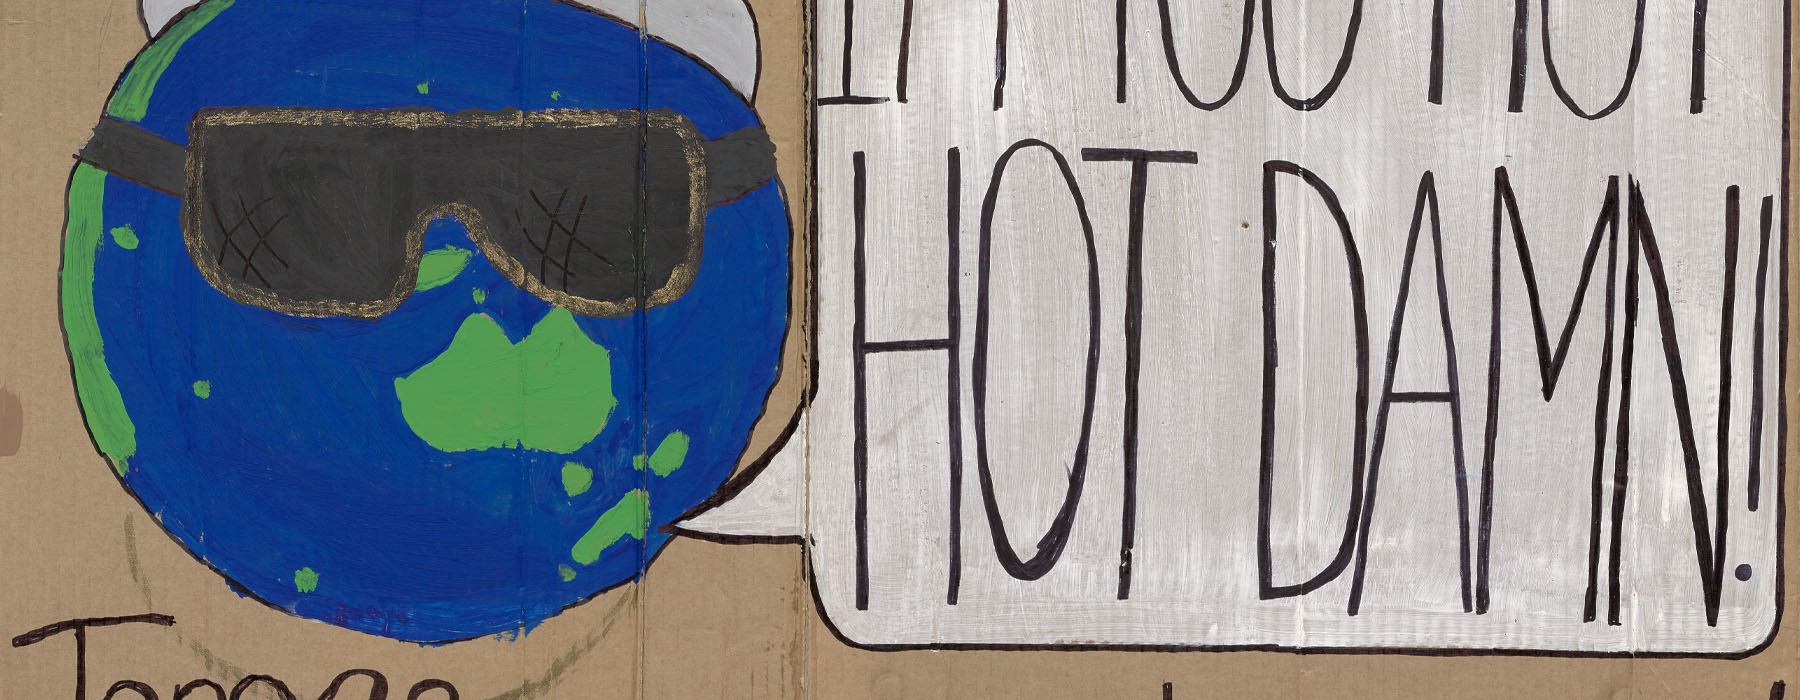 Handmade cardboard sign featuring a picture of the Earth, wearing sunglasses and a cap. Earth is saying “I’m too hot – hot damn!” Underneath is written “James Shaw – we need a plan!”